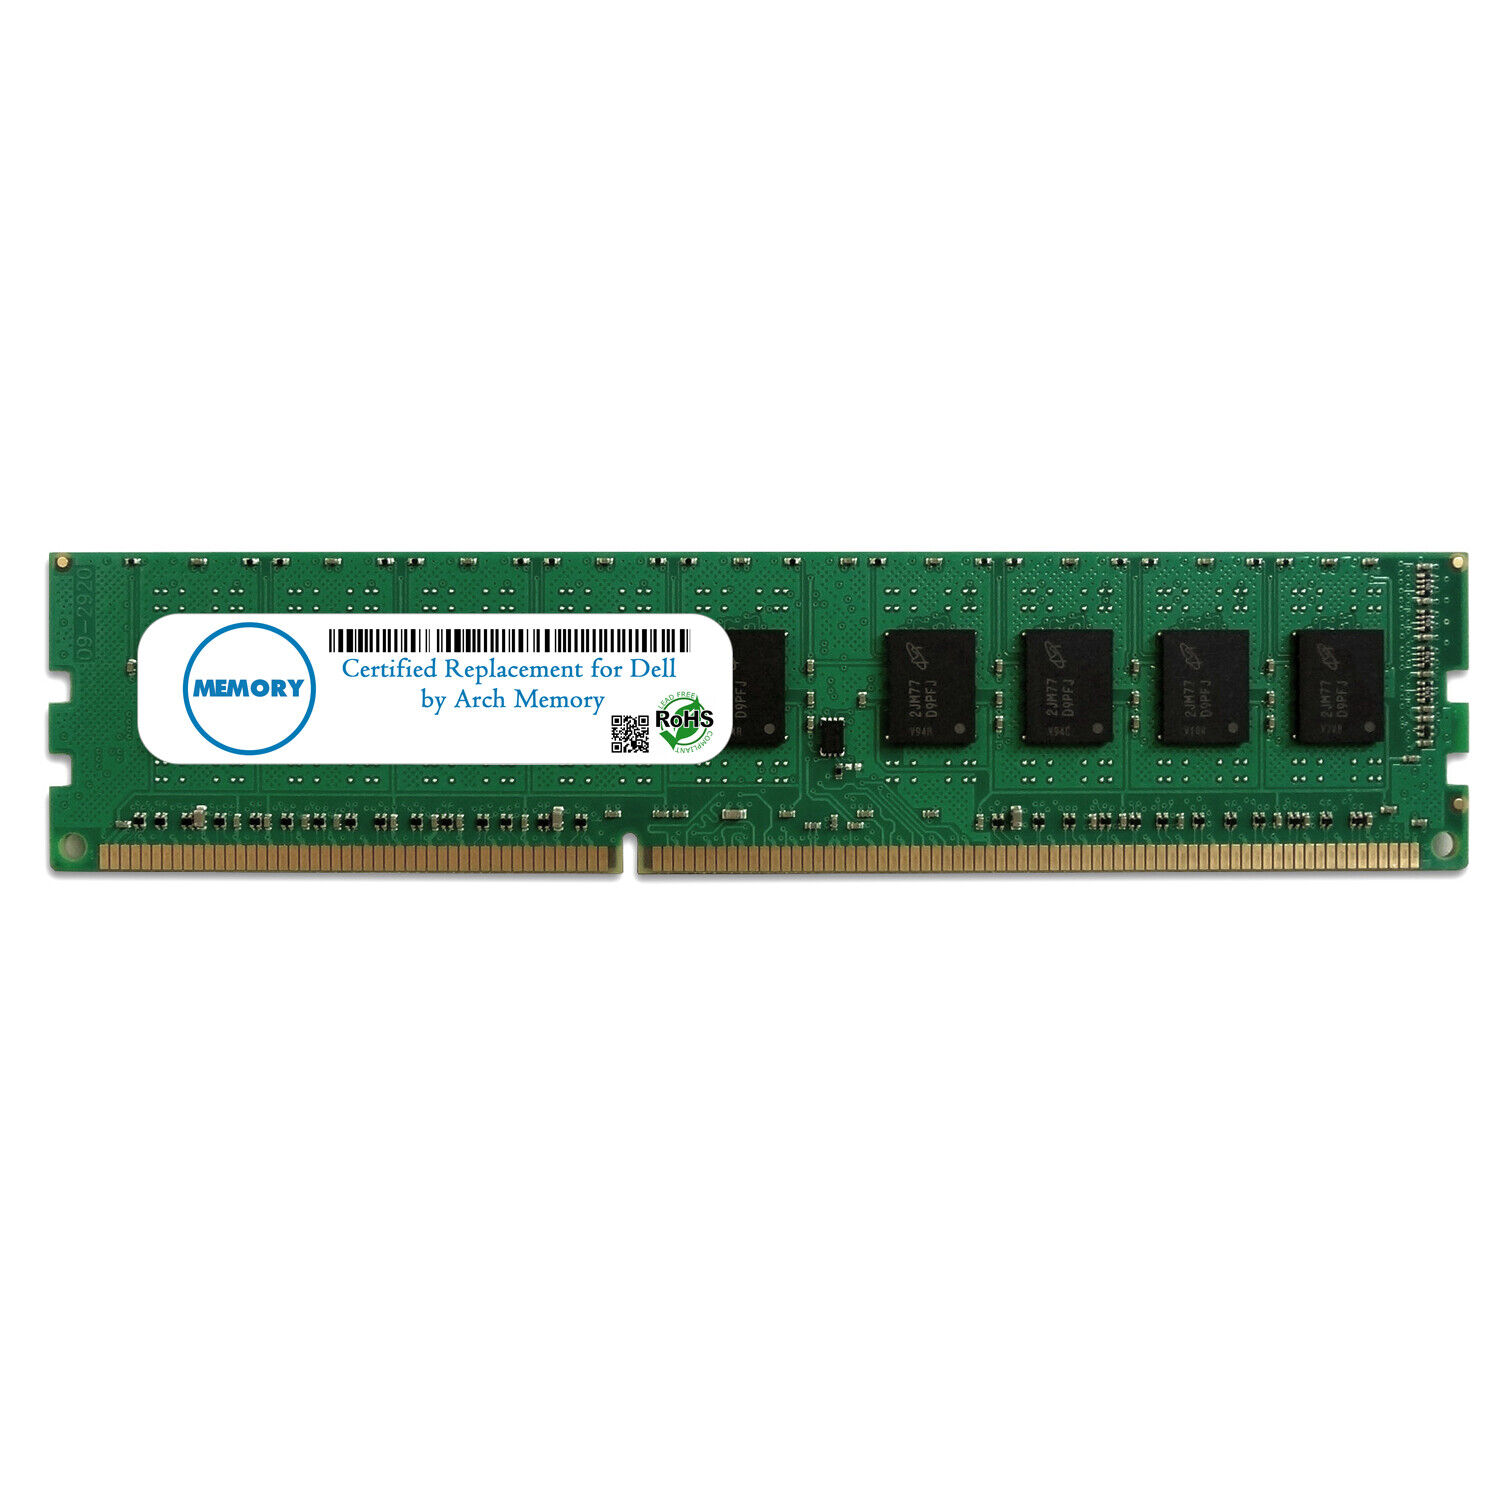 4GB SNPP4T2FC/4G A8733211 240-Pin PC3L-12800 DDR3L UDIMM RAM Memory for Dell